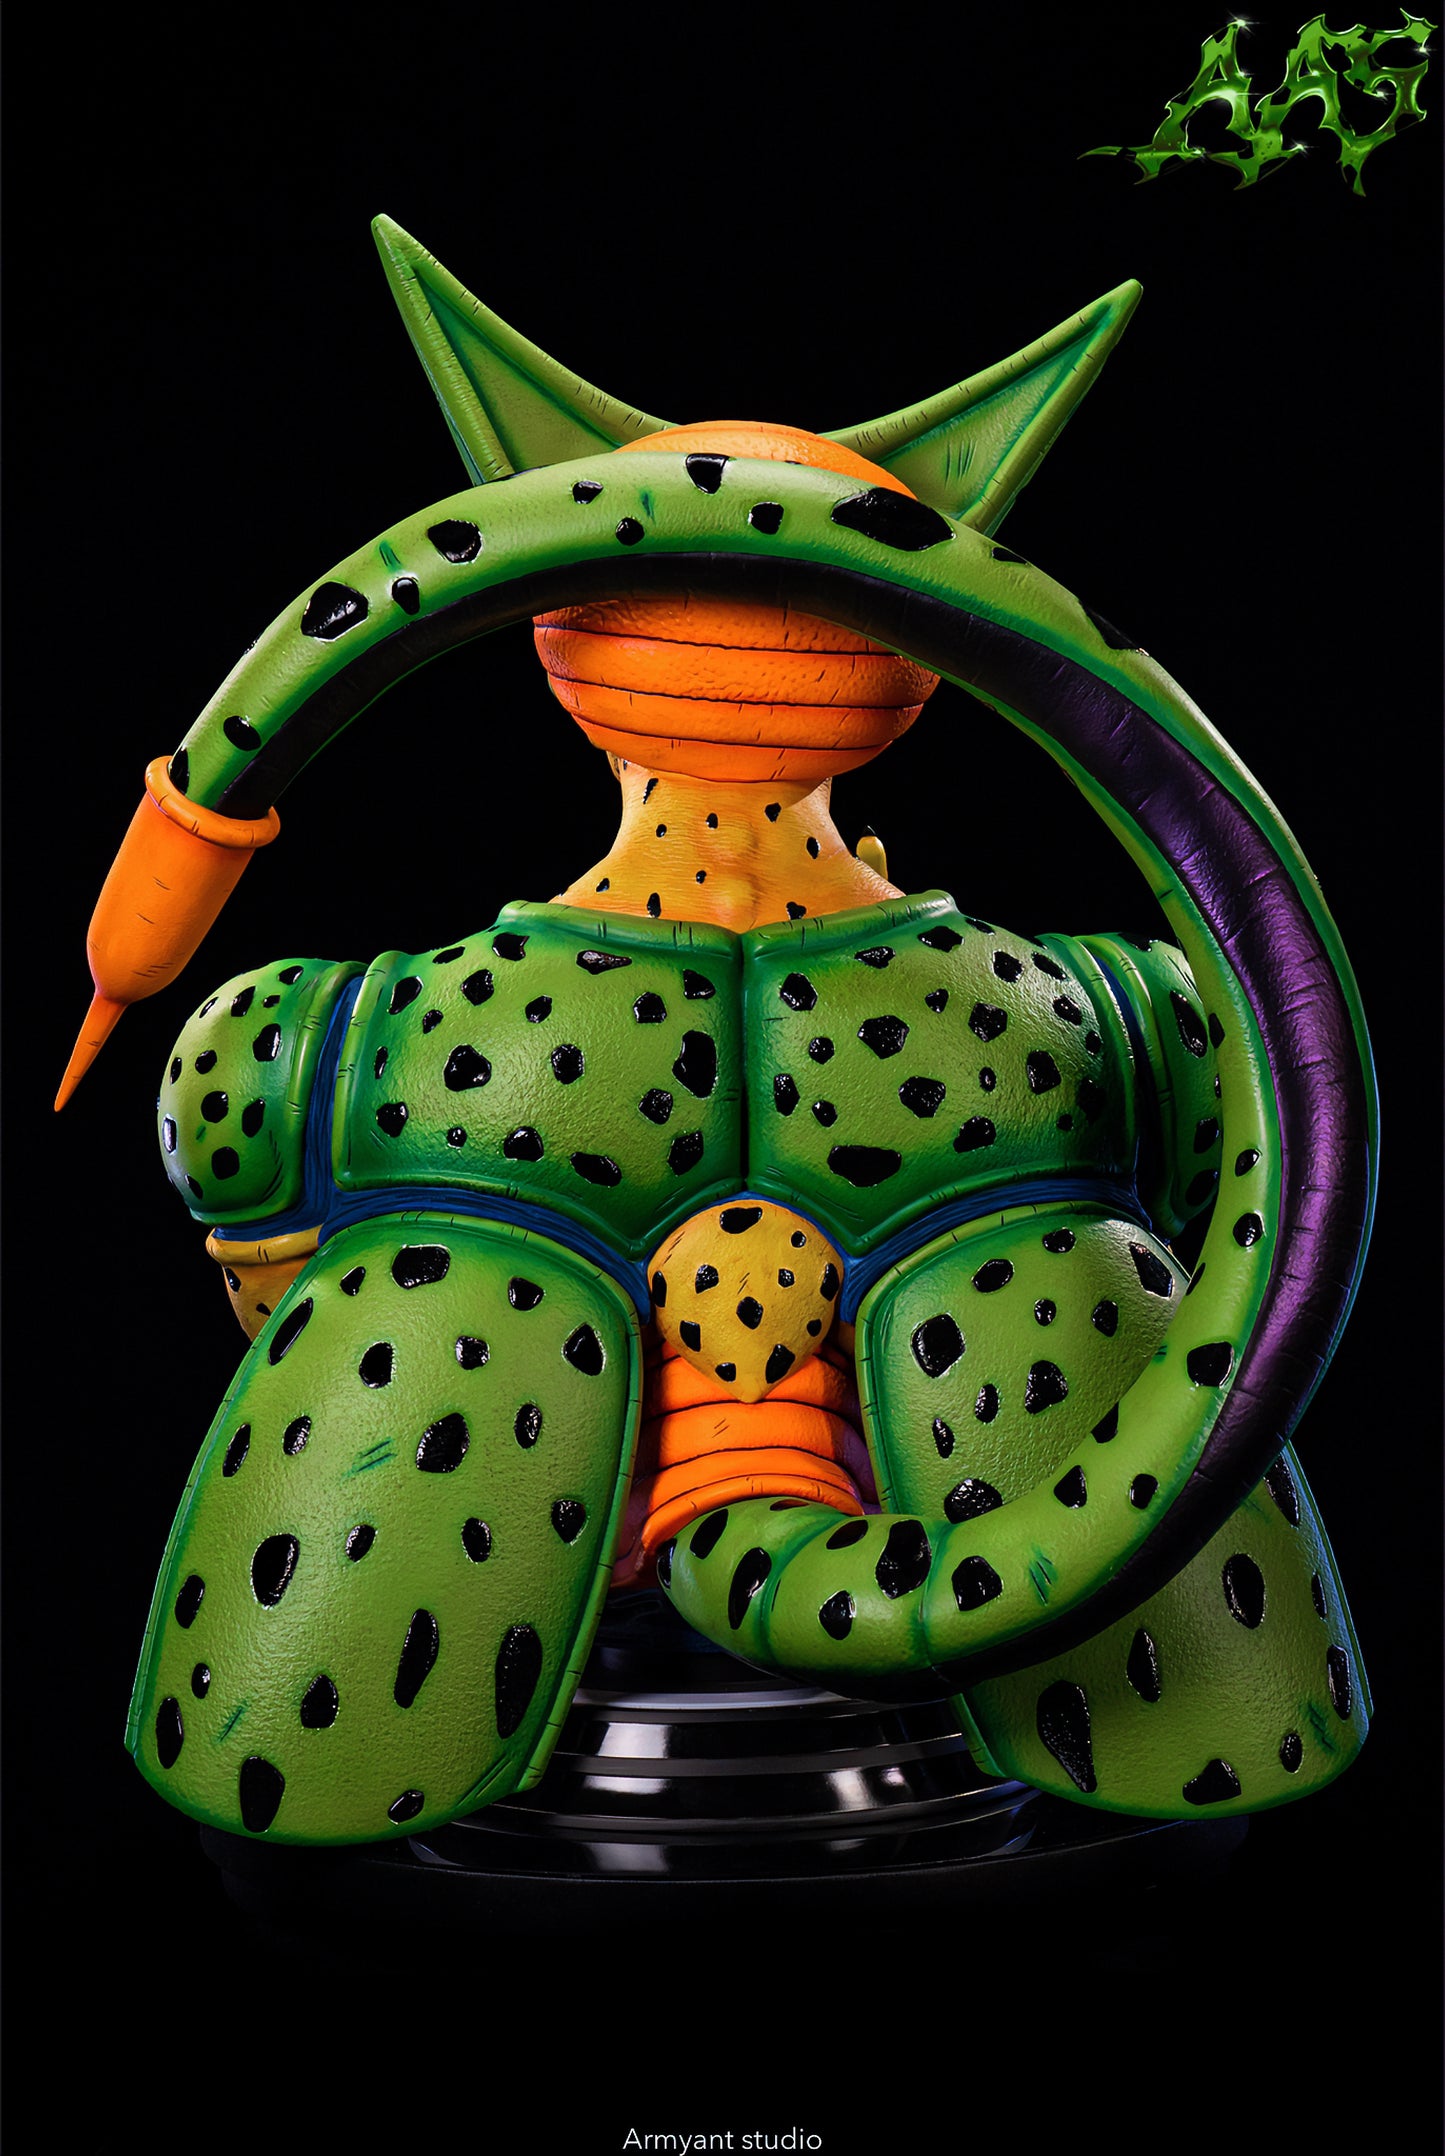 ARMYANT STUDIO – DRAGON BALL Z: ANDROIDS SAGA SERIES 1. IMPERFECT CELL BUST [PRE-ORDER]